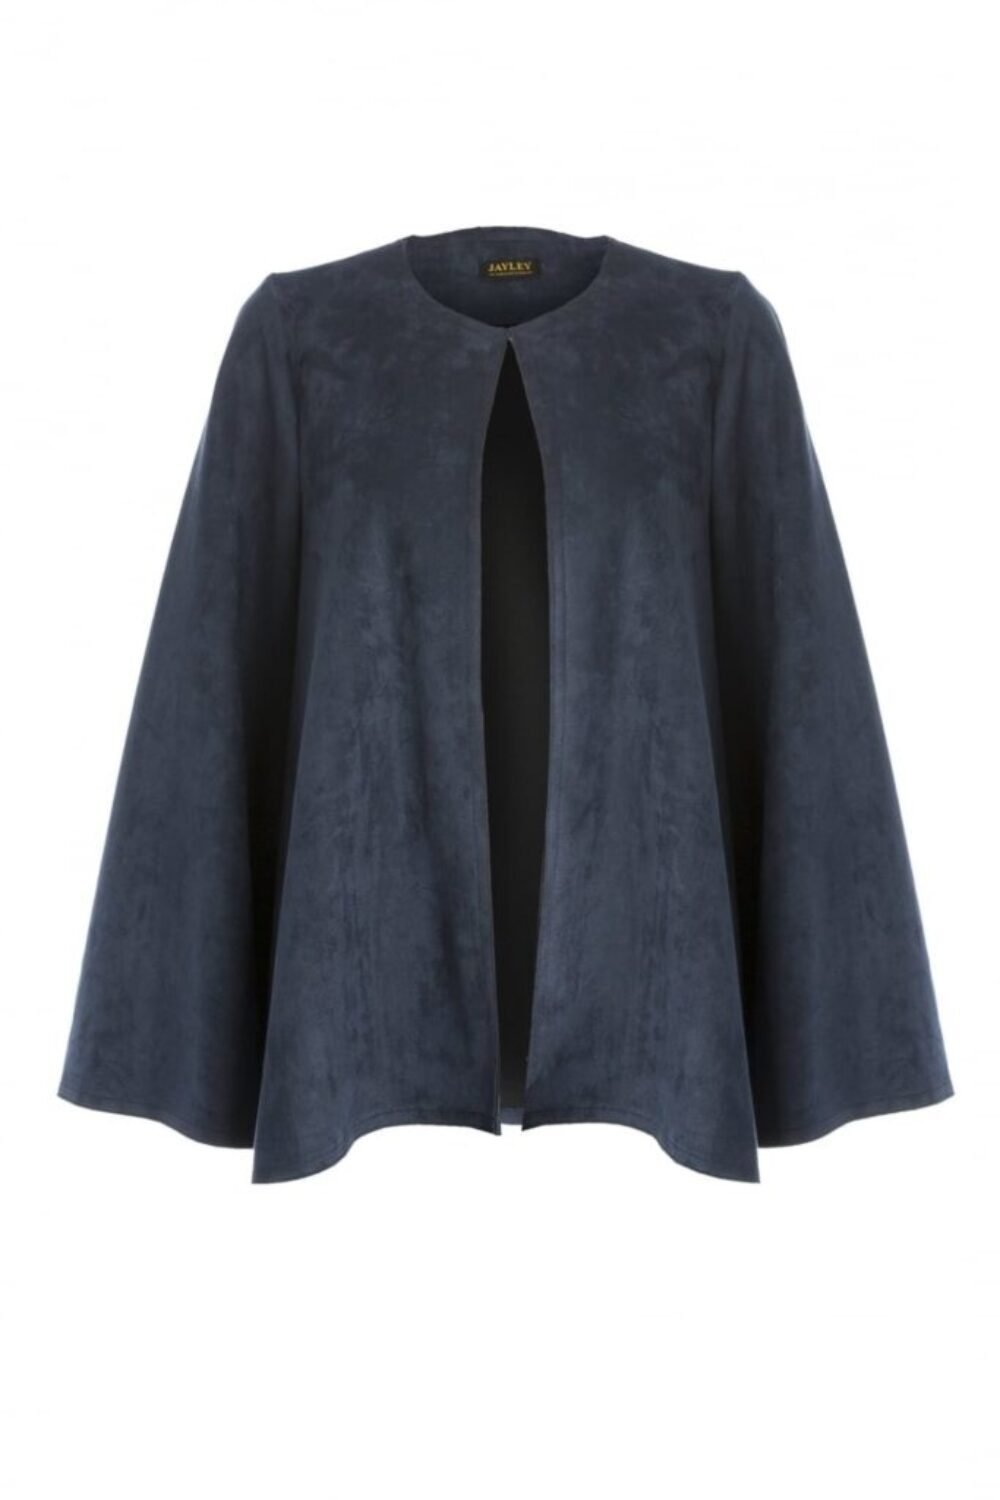 Shop Lux Navy Luxury Faux Suede Jacket and women's luxury and designer clothes at www.lux-apparel.co.uk